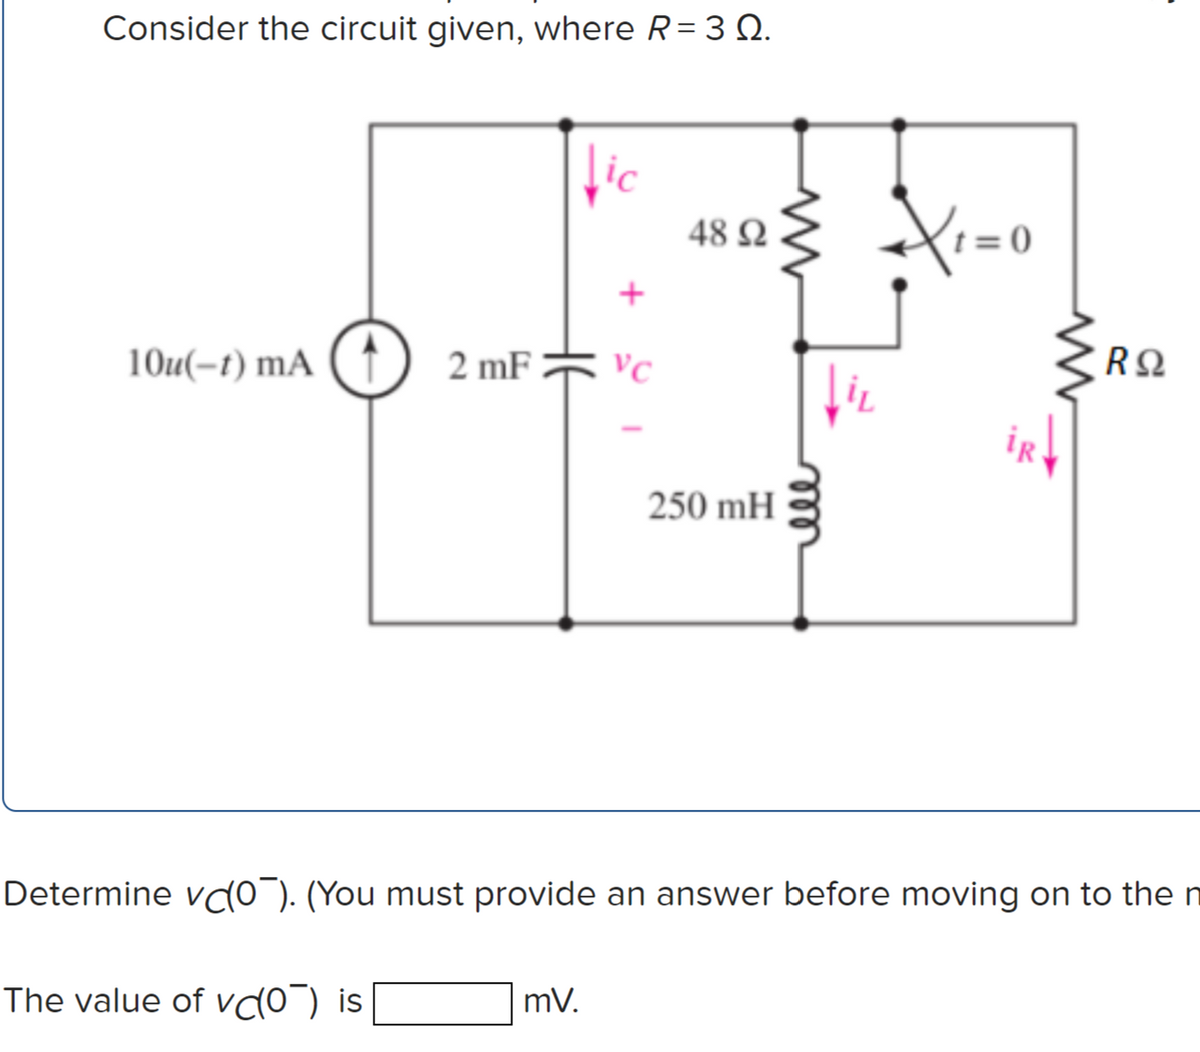 Consider the circuit given, where R= 3 Q.
lic
48 Ω
t = 0
10u(-1) mA
2 mF * vc
iR
250 mH
Determine vdo"). (You must provide an answer before moving on to the n
mV.
The value of vdo¯) is
